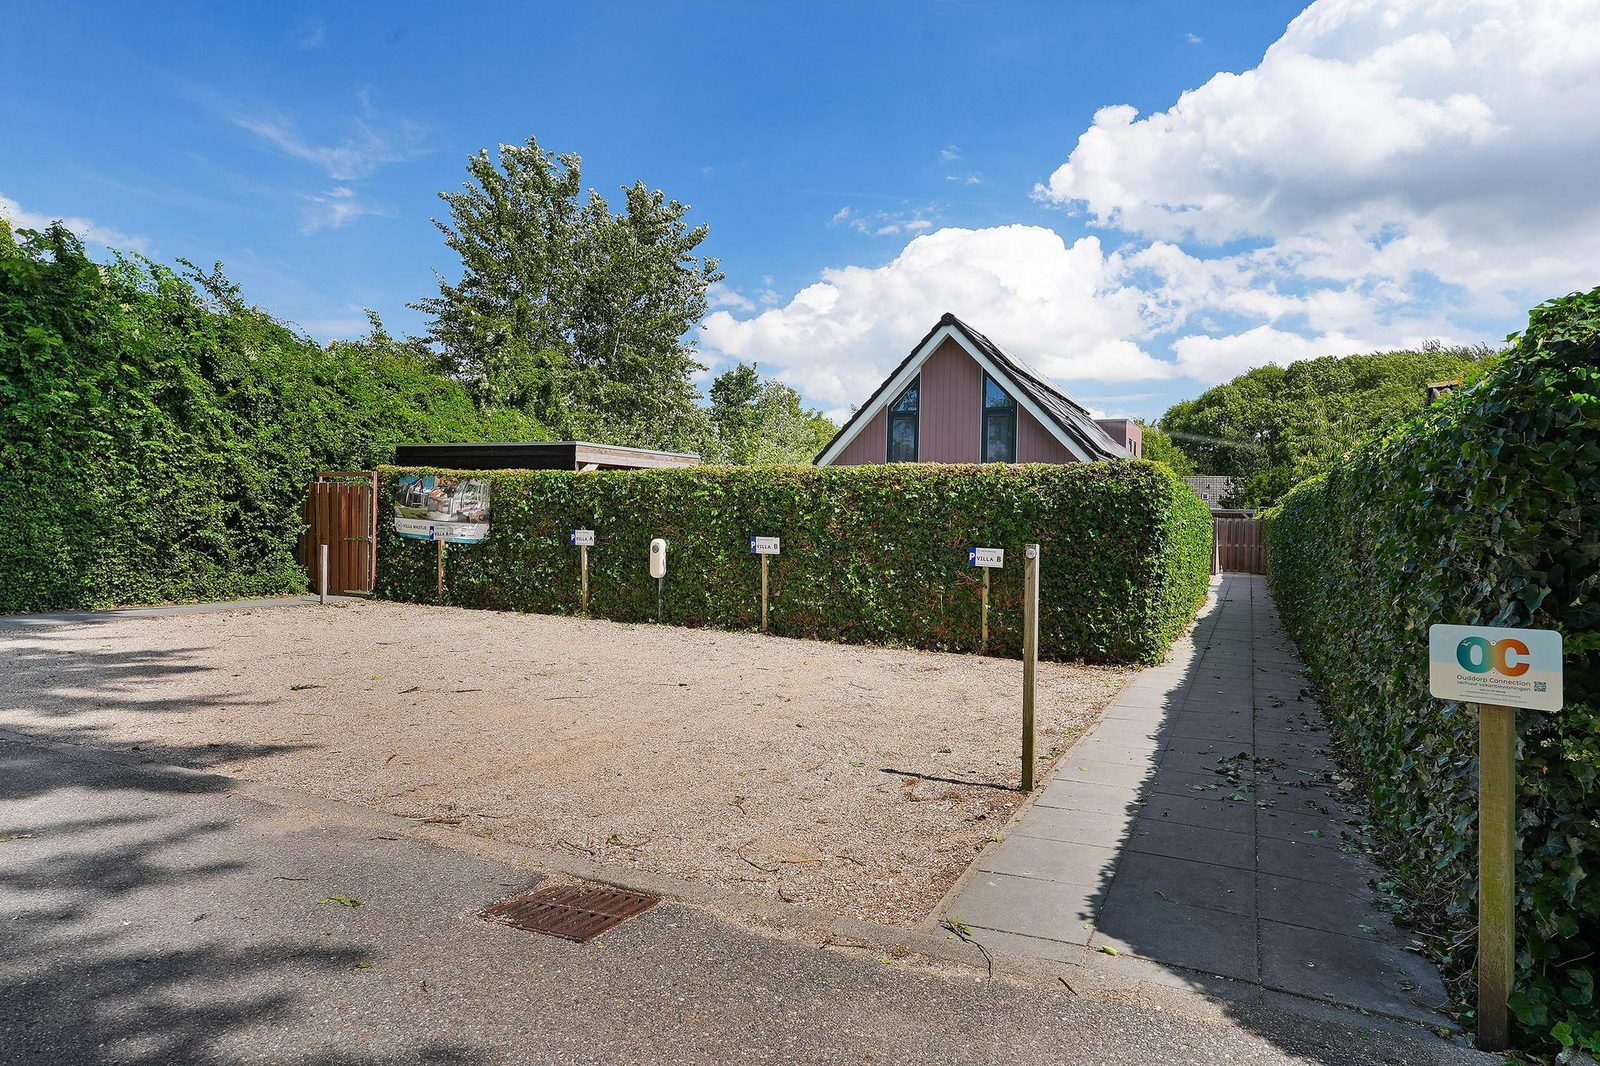 Oude Nieuwlandseweg 33 - Ouddorp - Villa Mastlo (with 2 jacuzzi's extra costs for use)